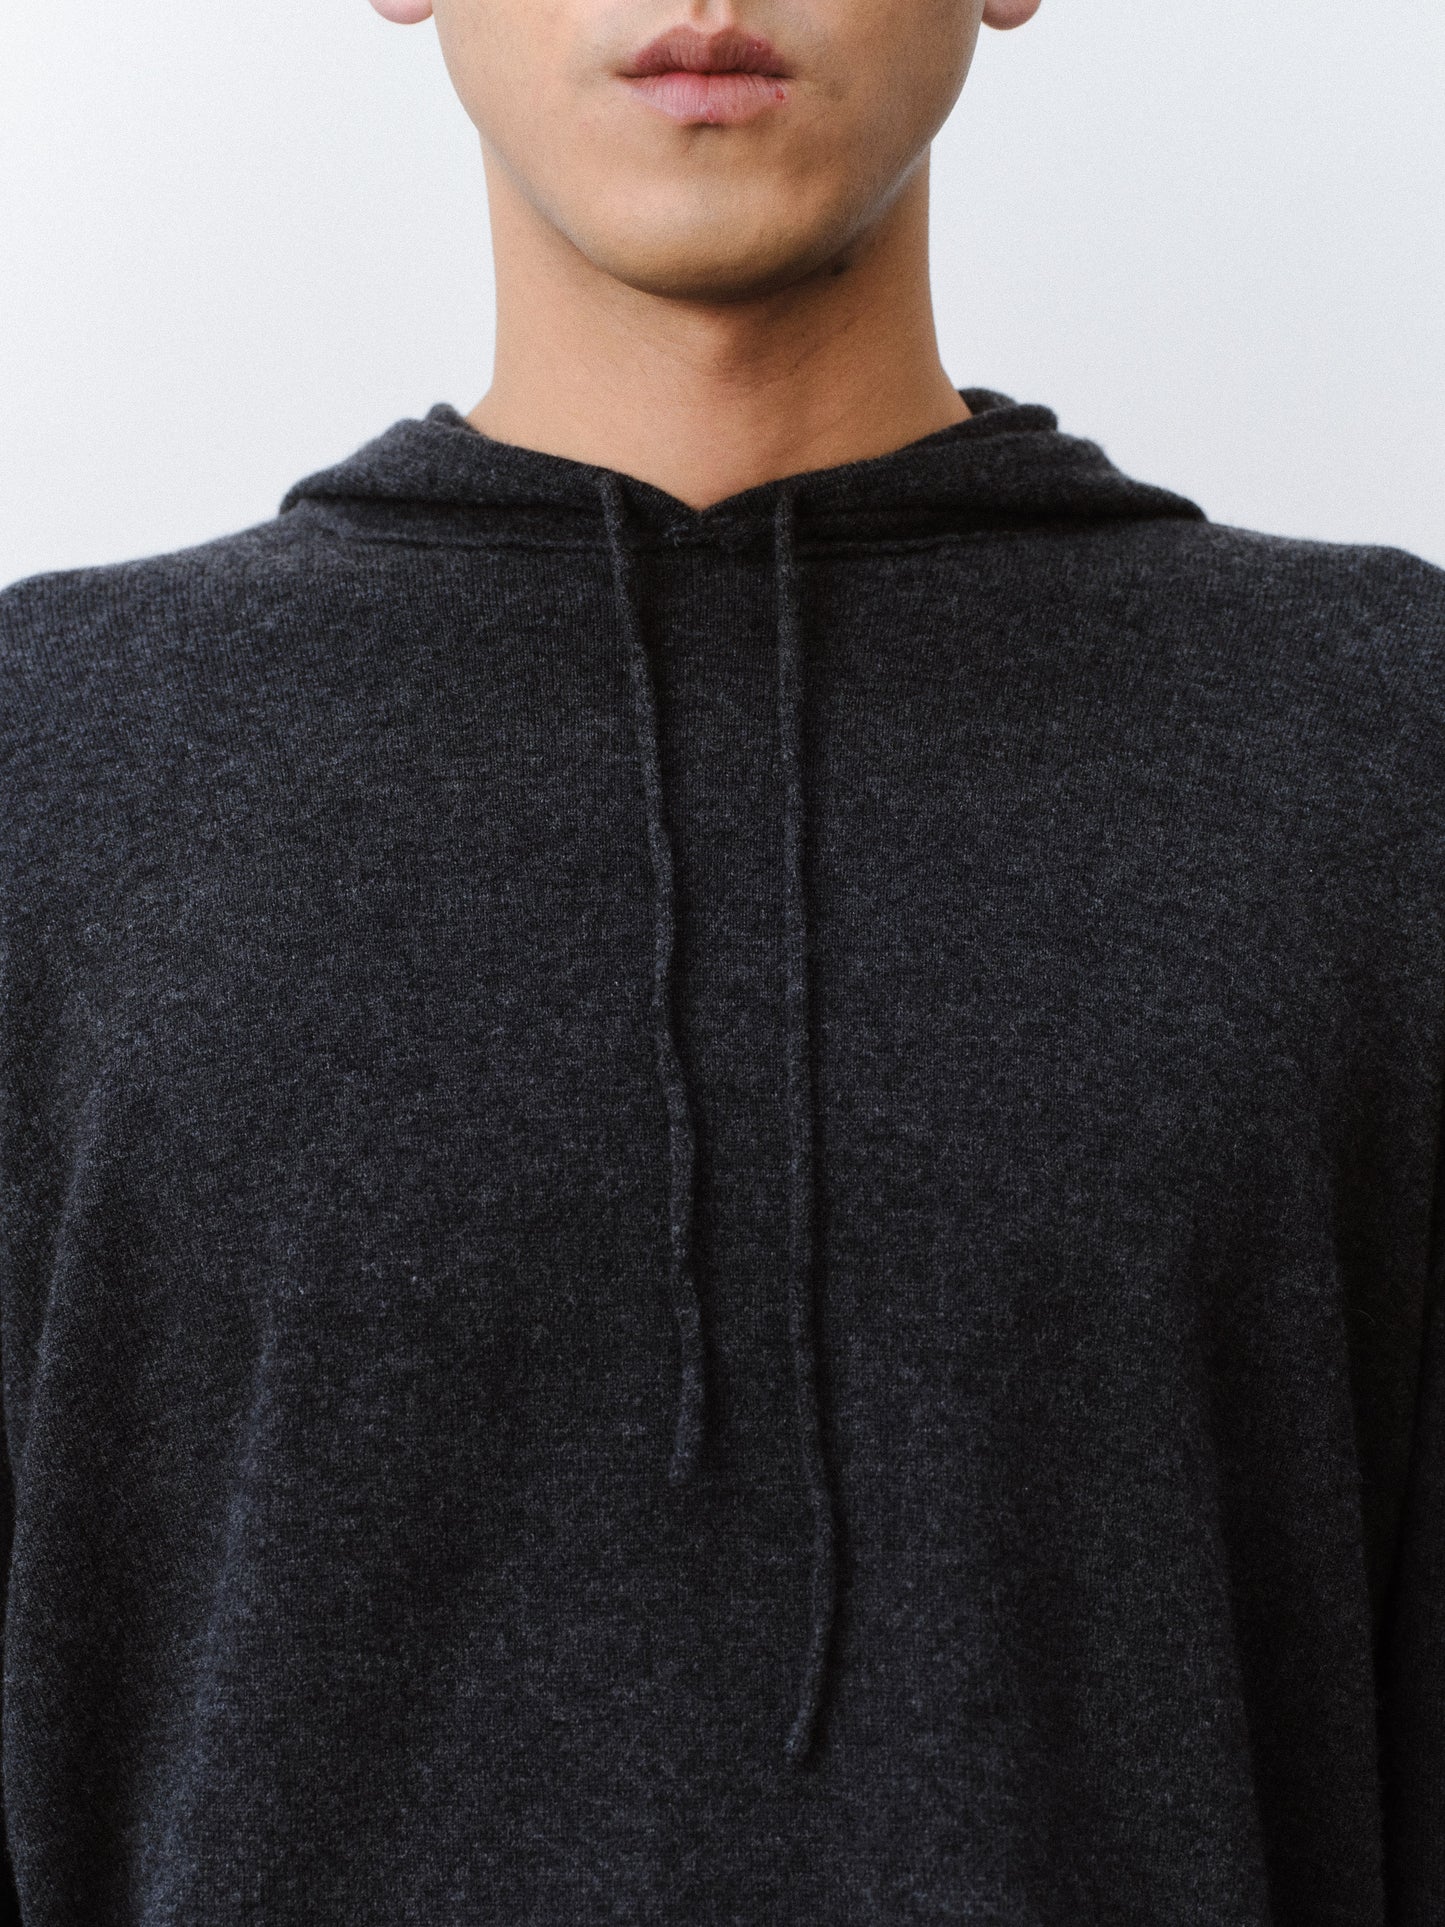 Ethan cashmere wool hoodie knit unisex